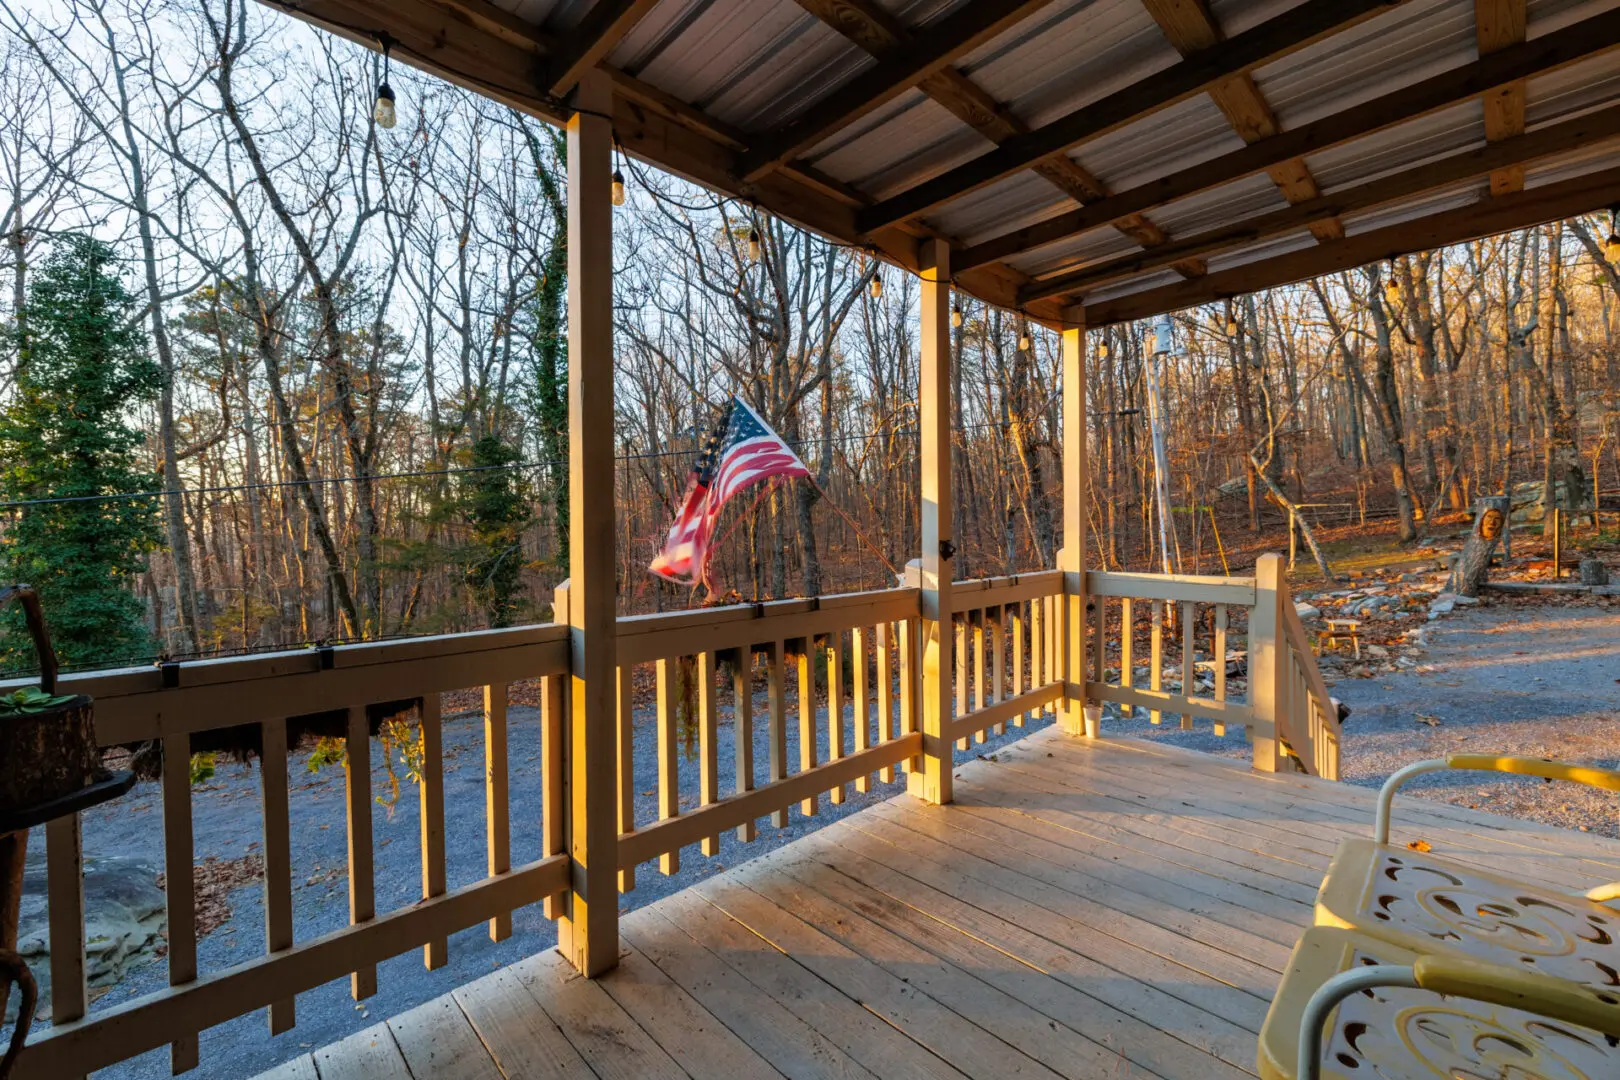 A wooden porch with an american flag, perfect for a relaxing vacation.